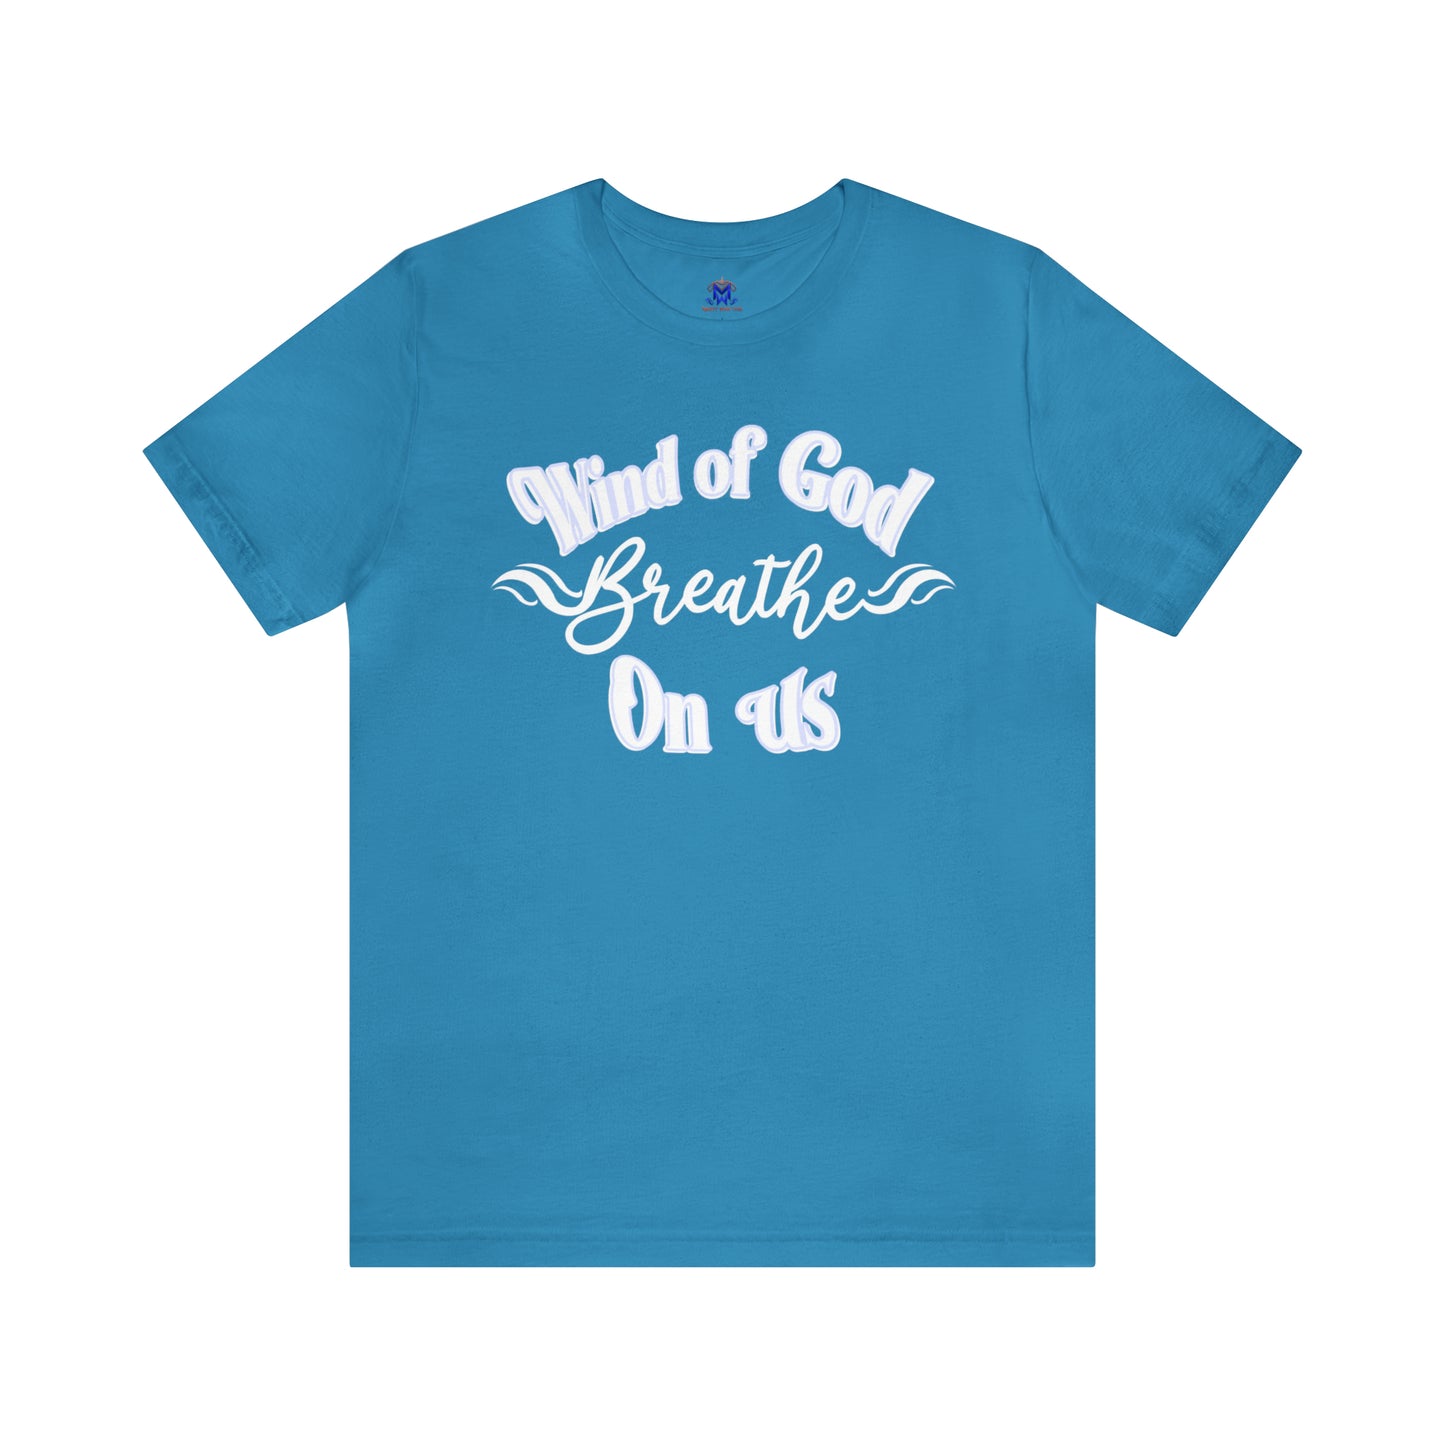 Wind of God-(Available in more colors)